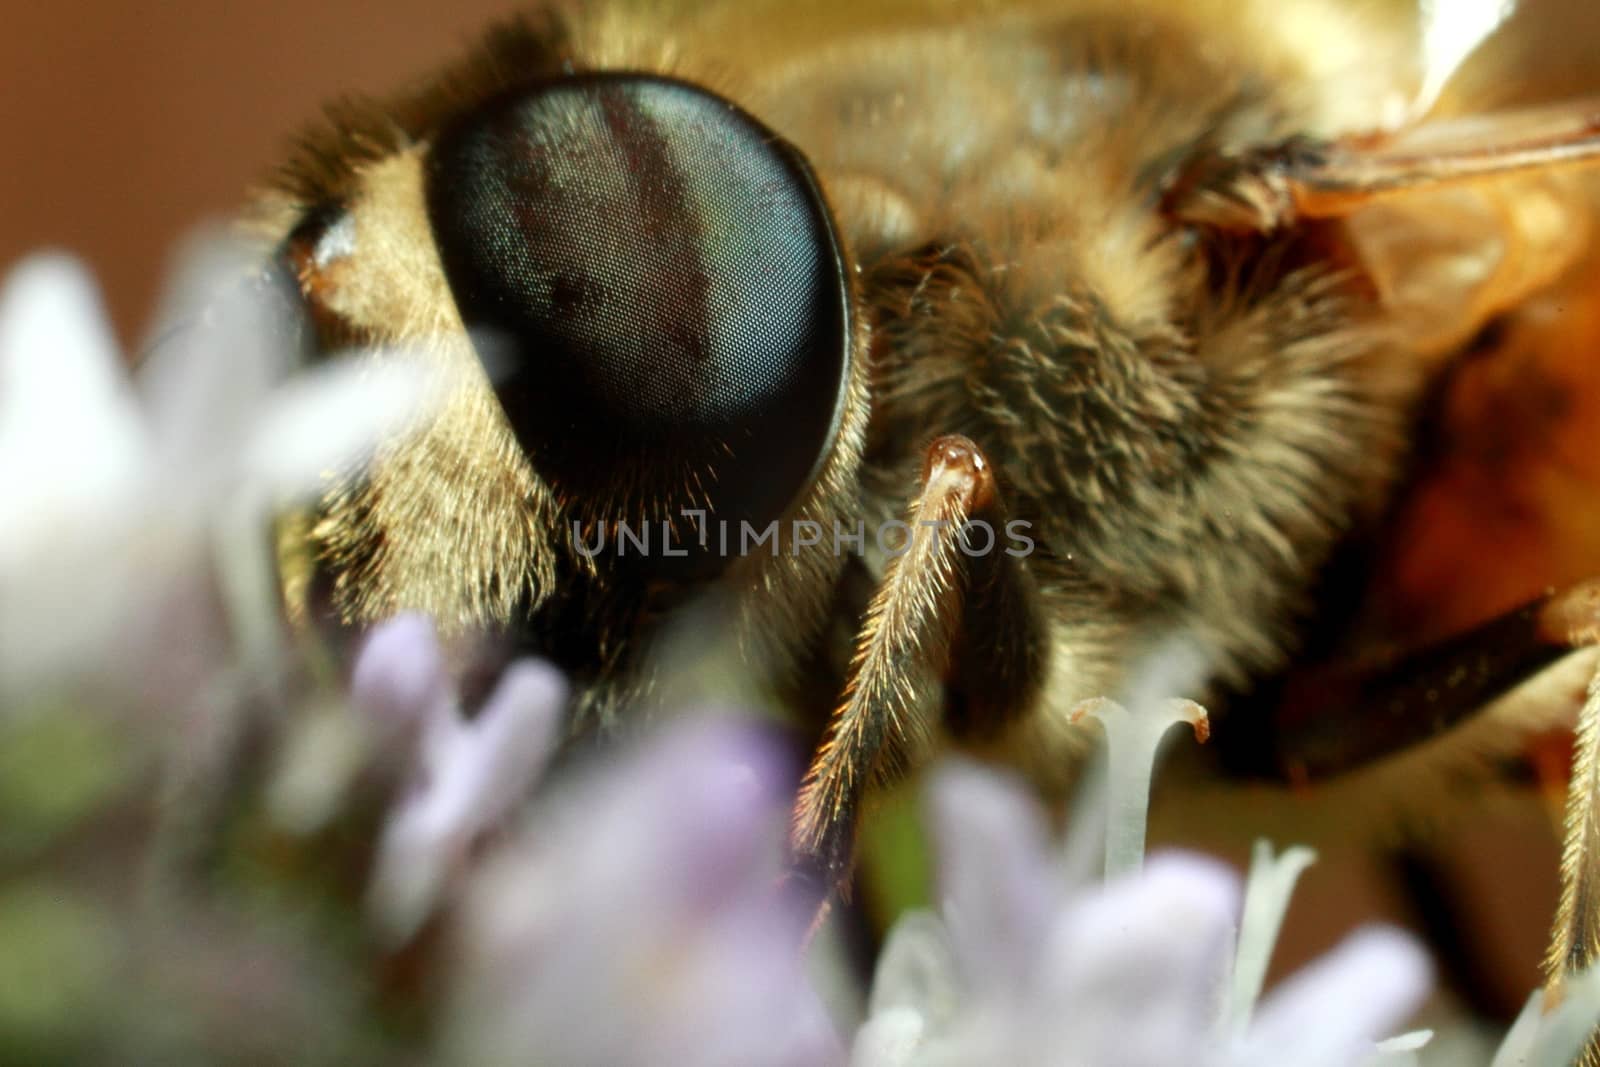 a bee collects pollen and nectar, honey from a flower. High quality photo